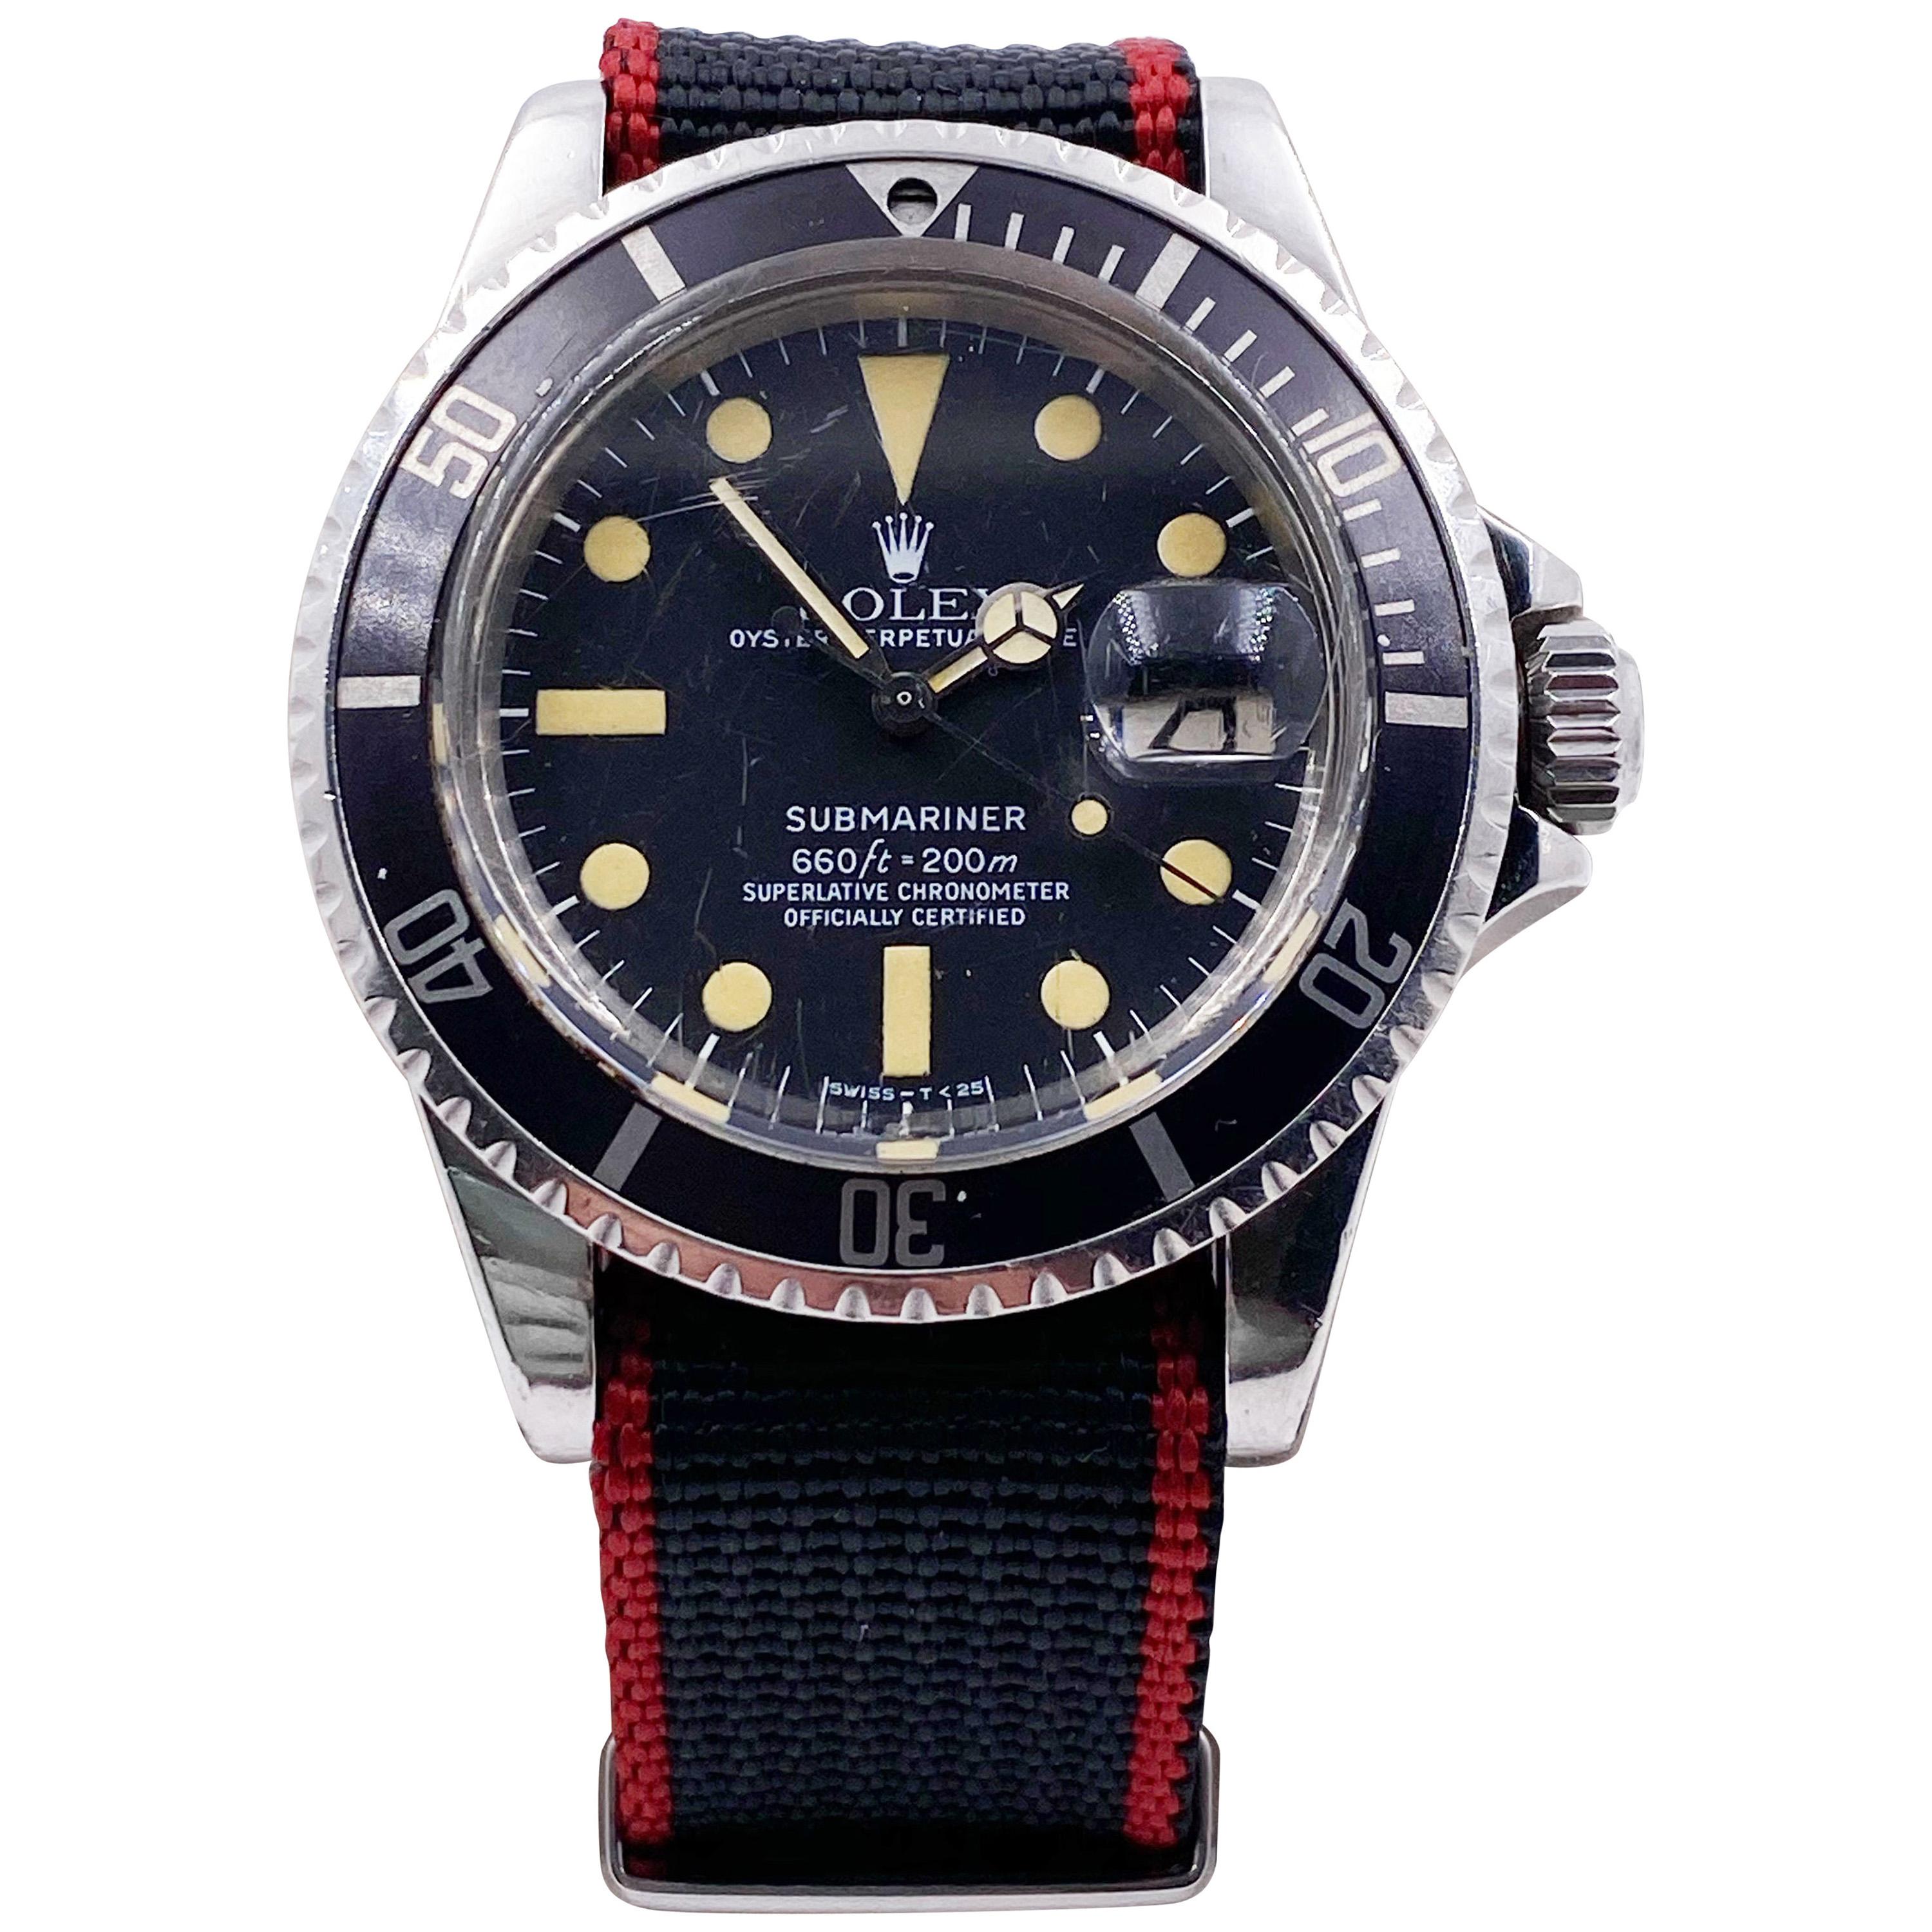 Style Number: 1680
Serial: 5295***
Year: 1978
Model: Submariner
Case Material: Stainless Steel 
Bezel: Black
Dial: Black
Face: Acrylic
Case Size: 40mm

Includes: 
-Elegant Watch Box 
-Certified Appraisal 
-1 Year Warranty 